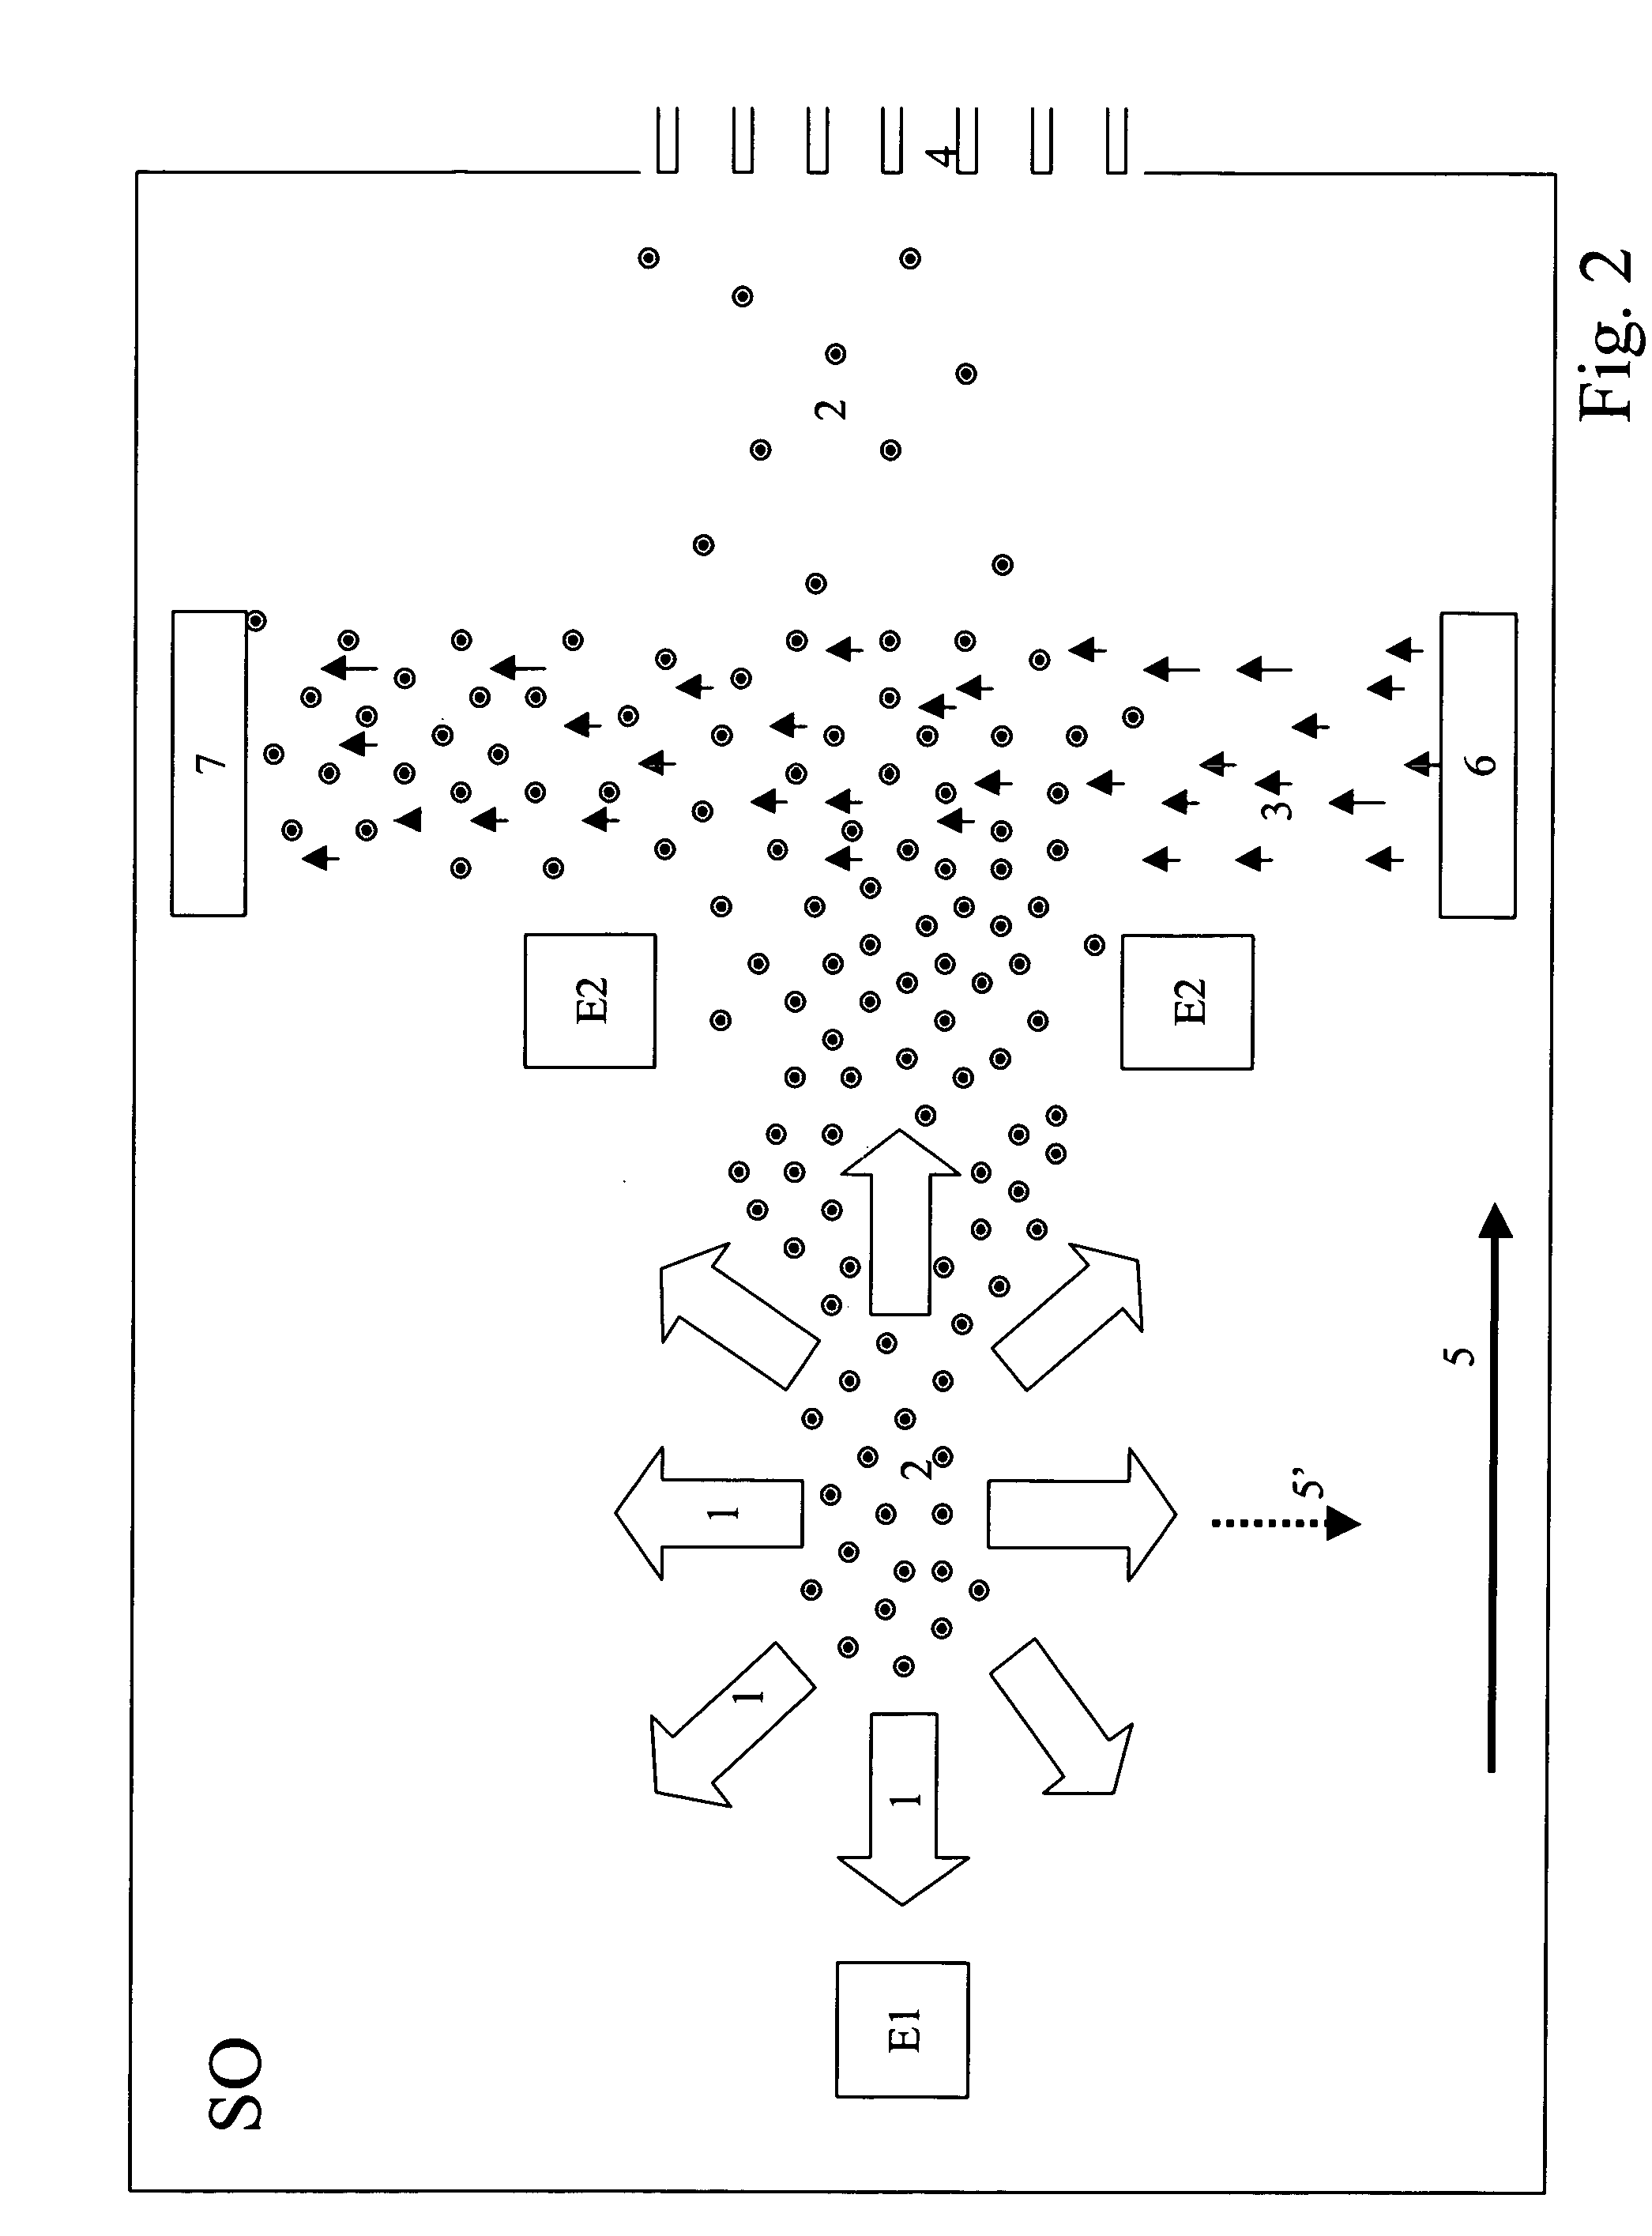 Lithographic apparatus and radiation source comprising a debris-mitigation system and method for mitigating debris particles in a lithographic apparatus